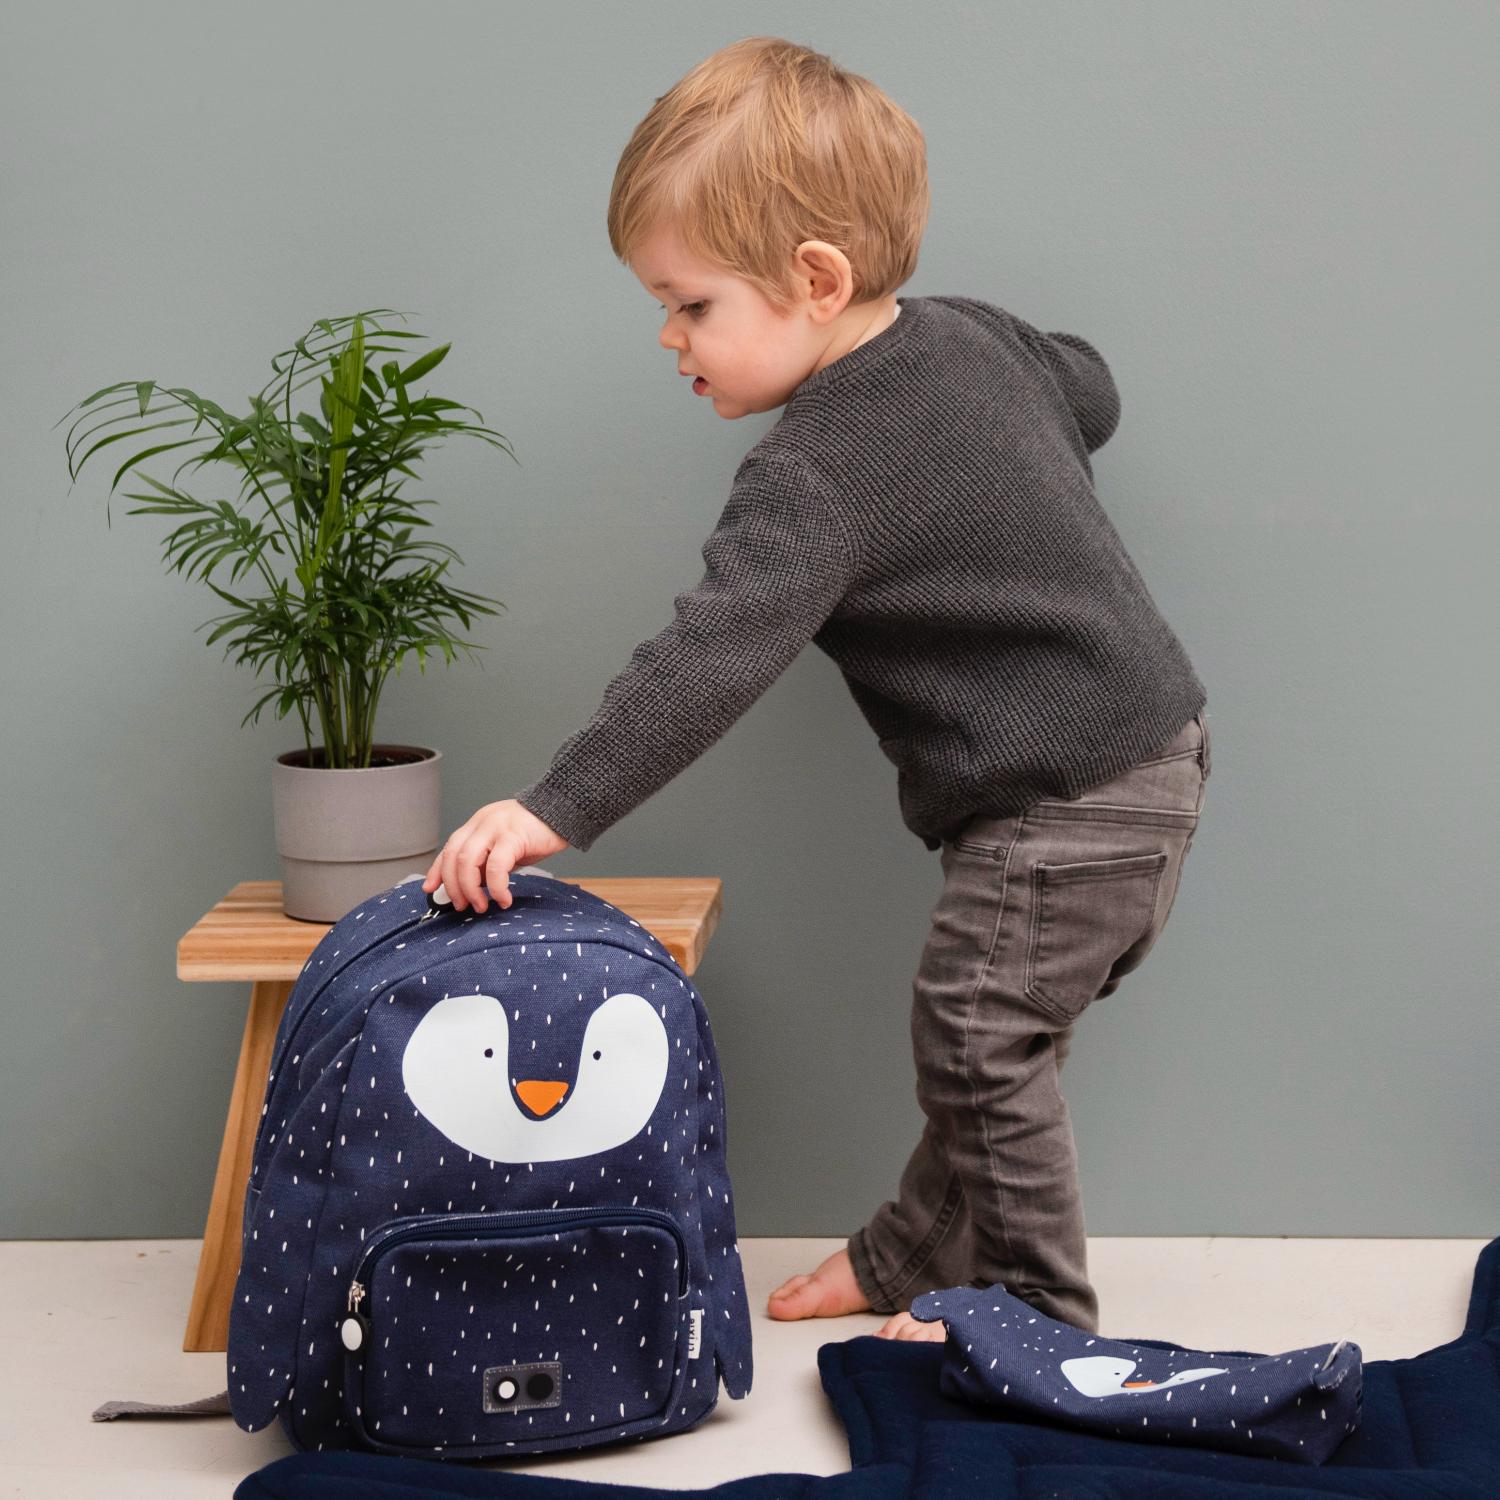 Trixie Mr. Penguin Backpack | Kid’s Backpack for Creche, Nursery & School | Lifestyle: Boy Packing Backpack | BeoVERDE.ie